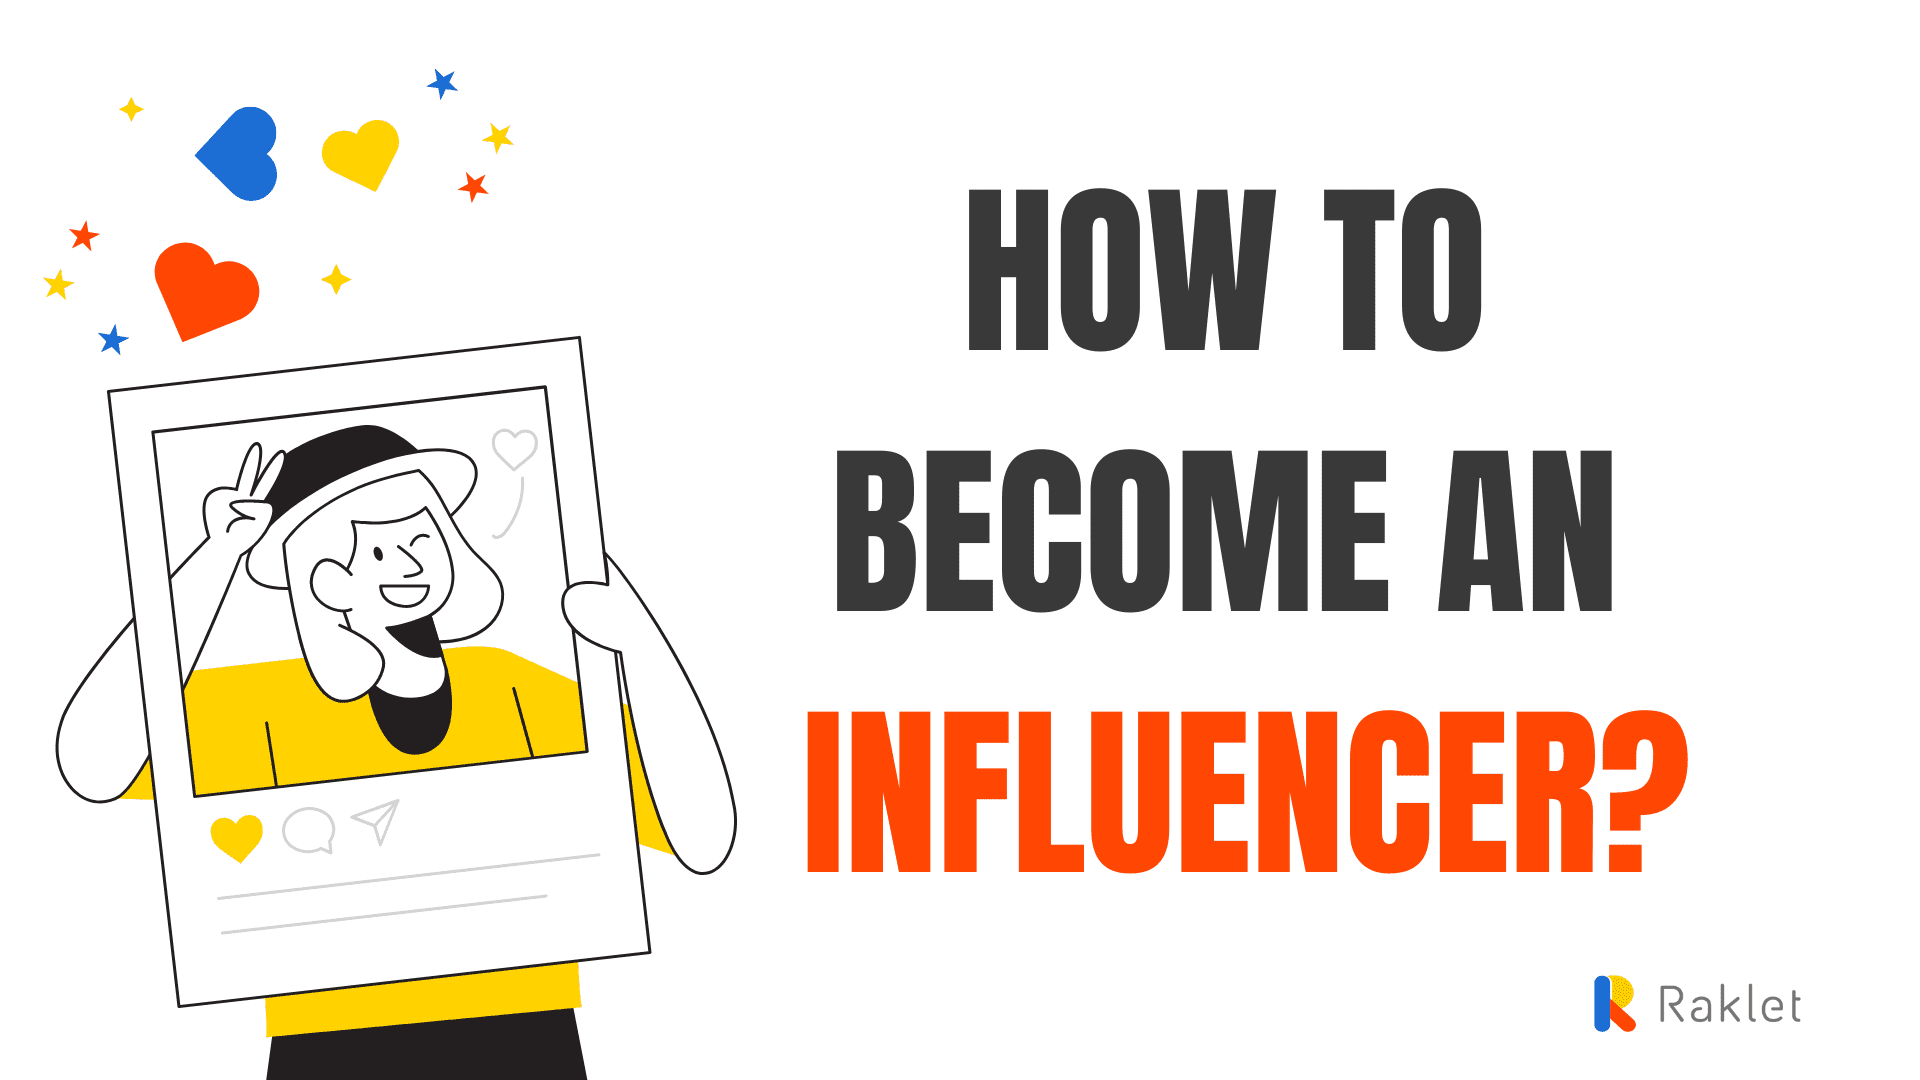 How to Become an Influencer (1)